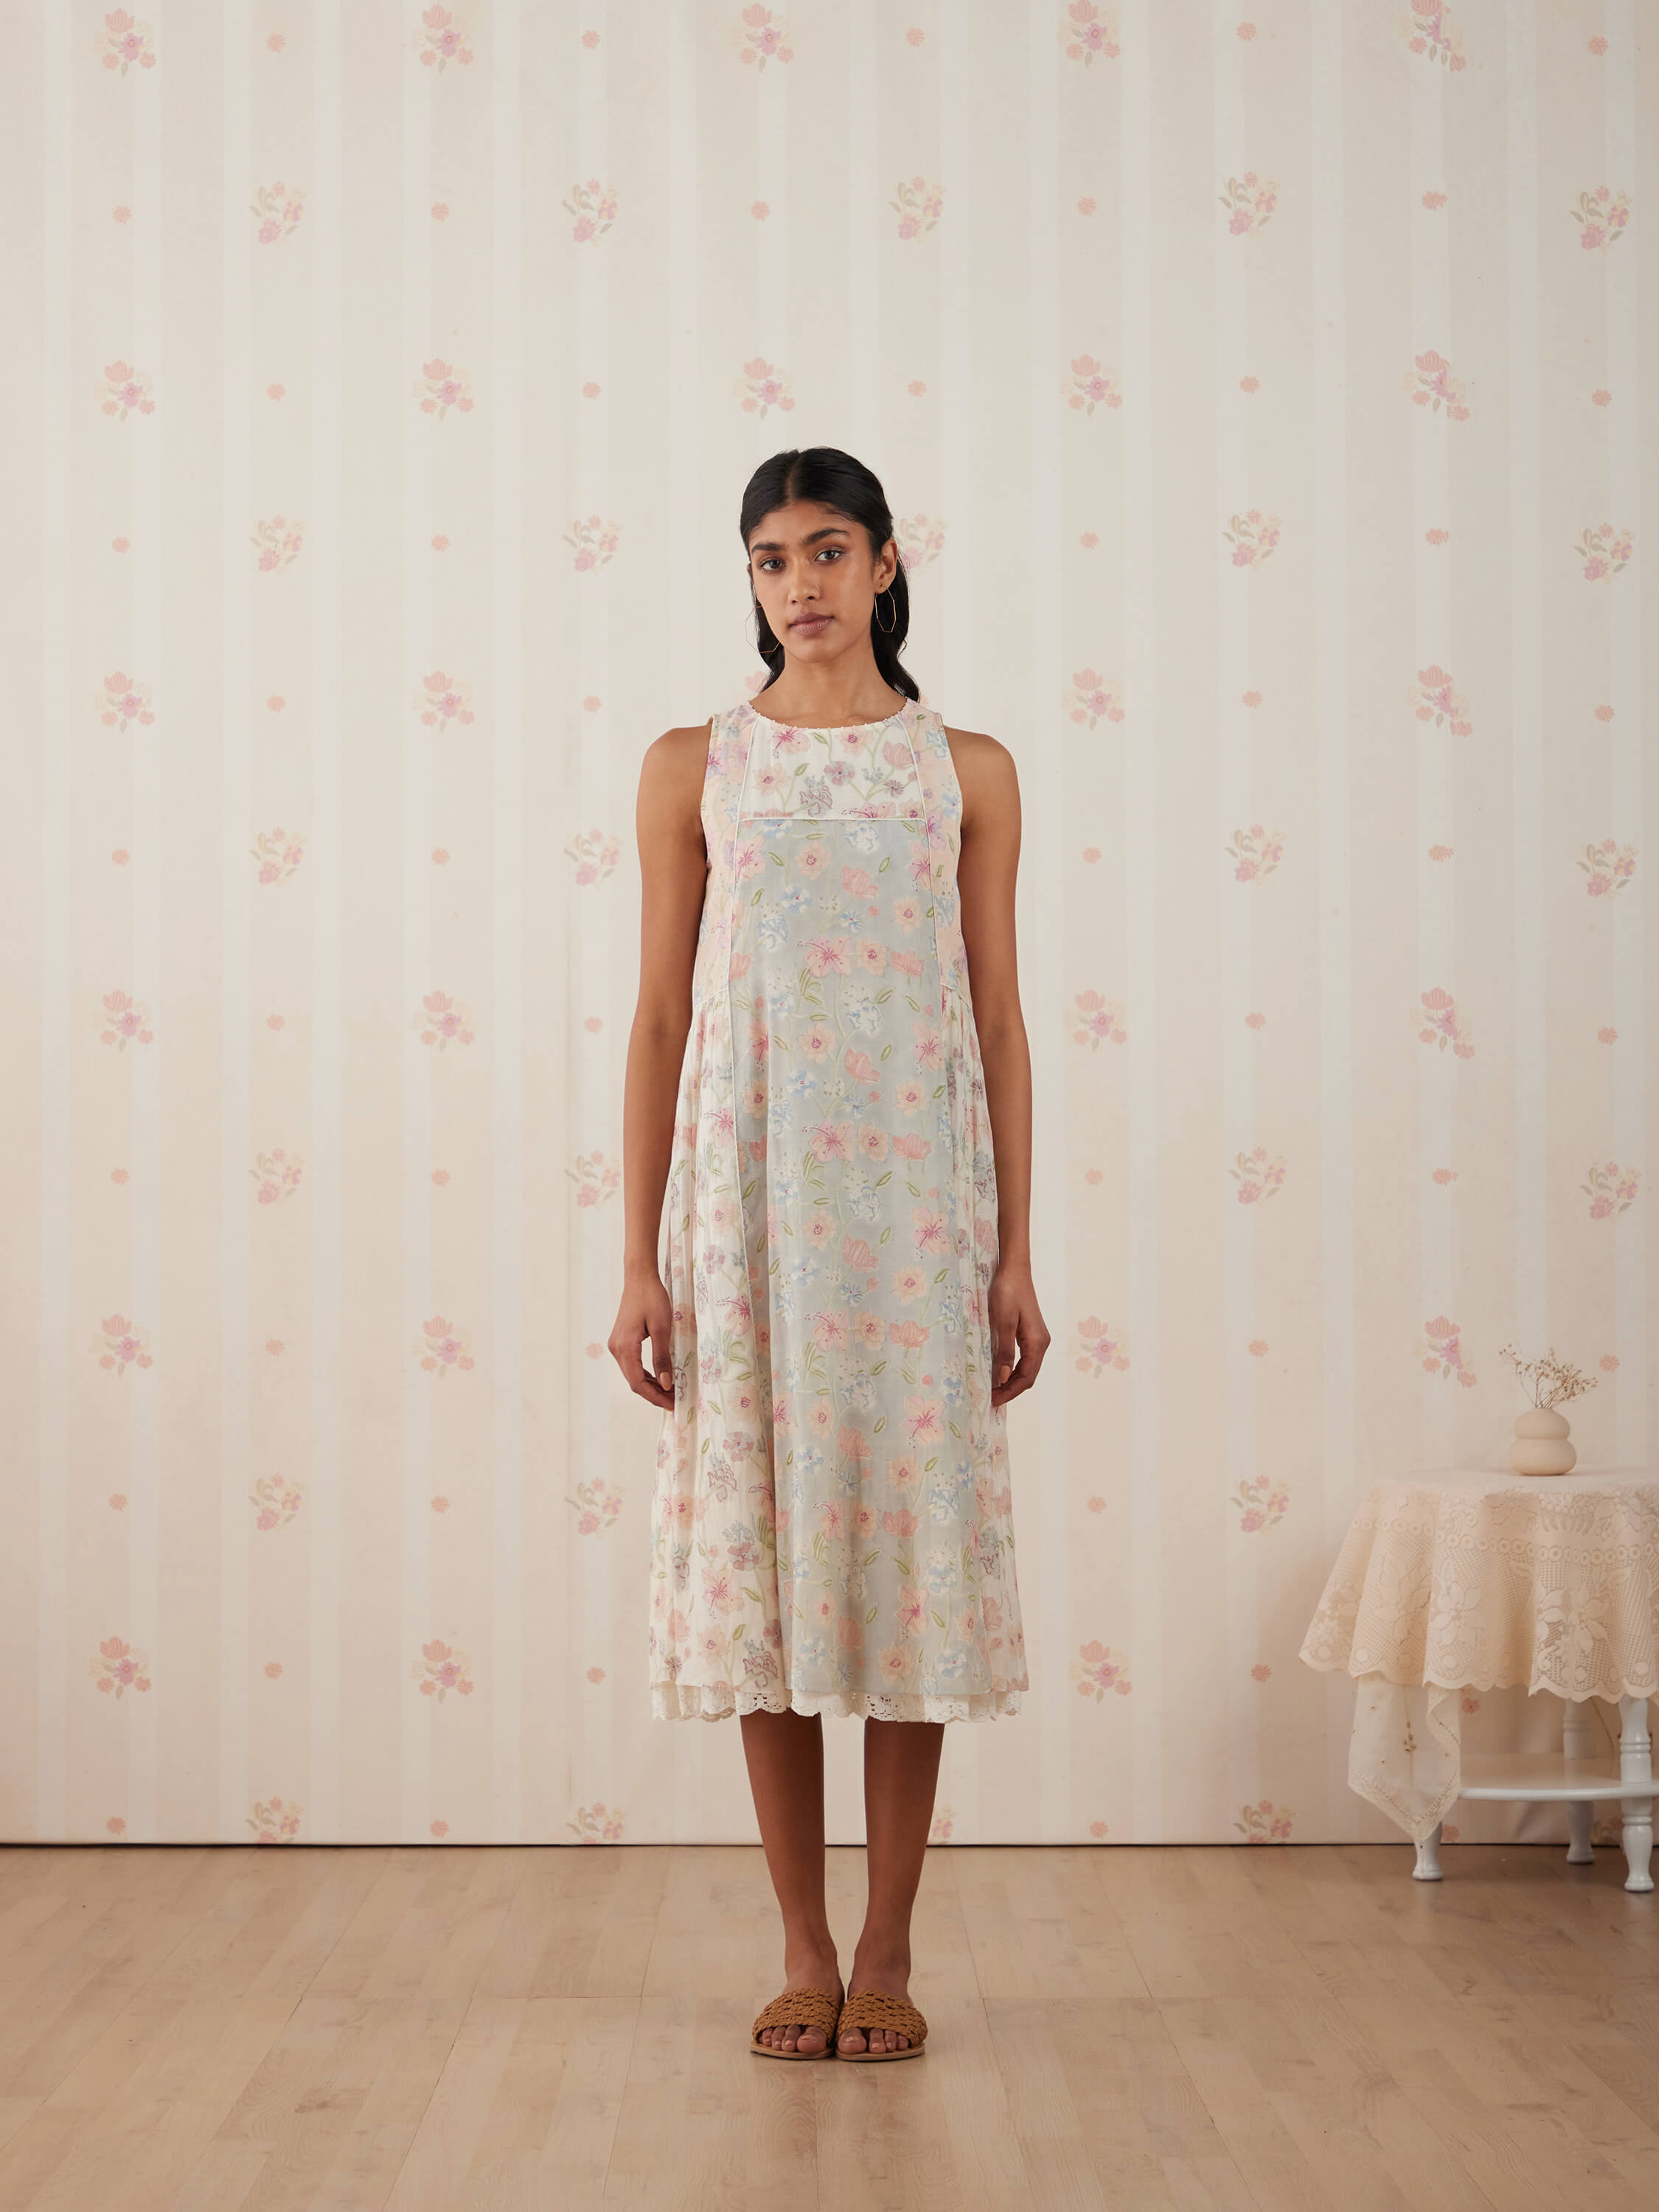 Woman wearing floral dress standing against vintage wallpaper background.